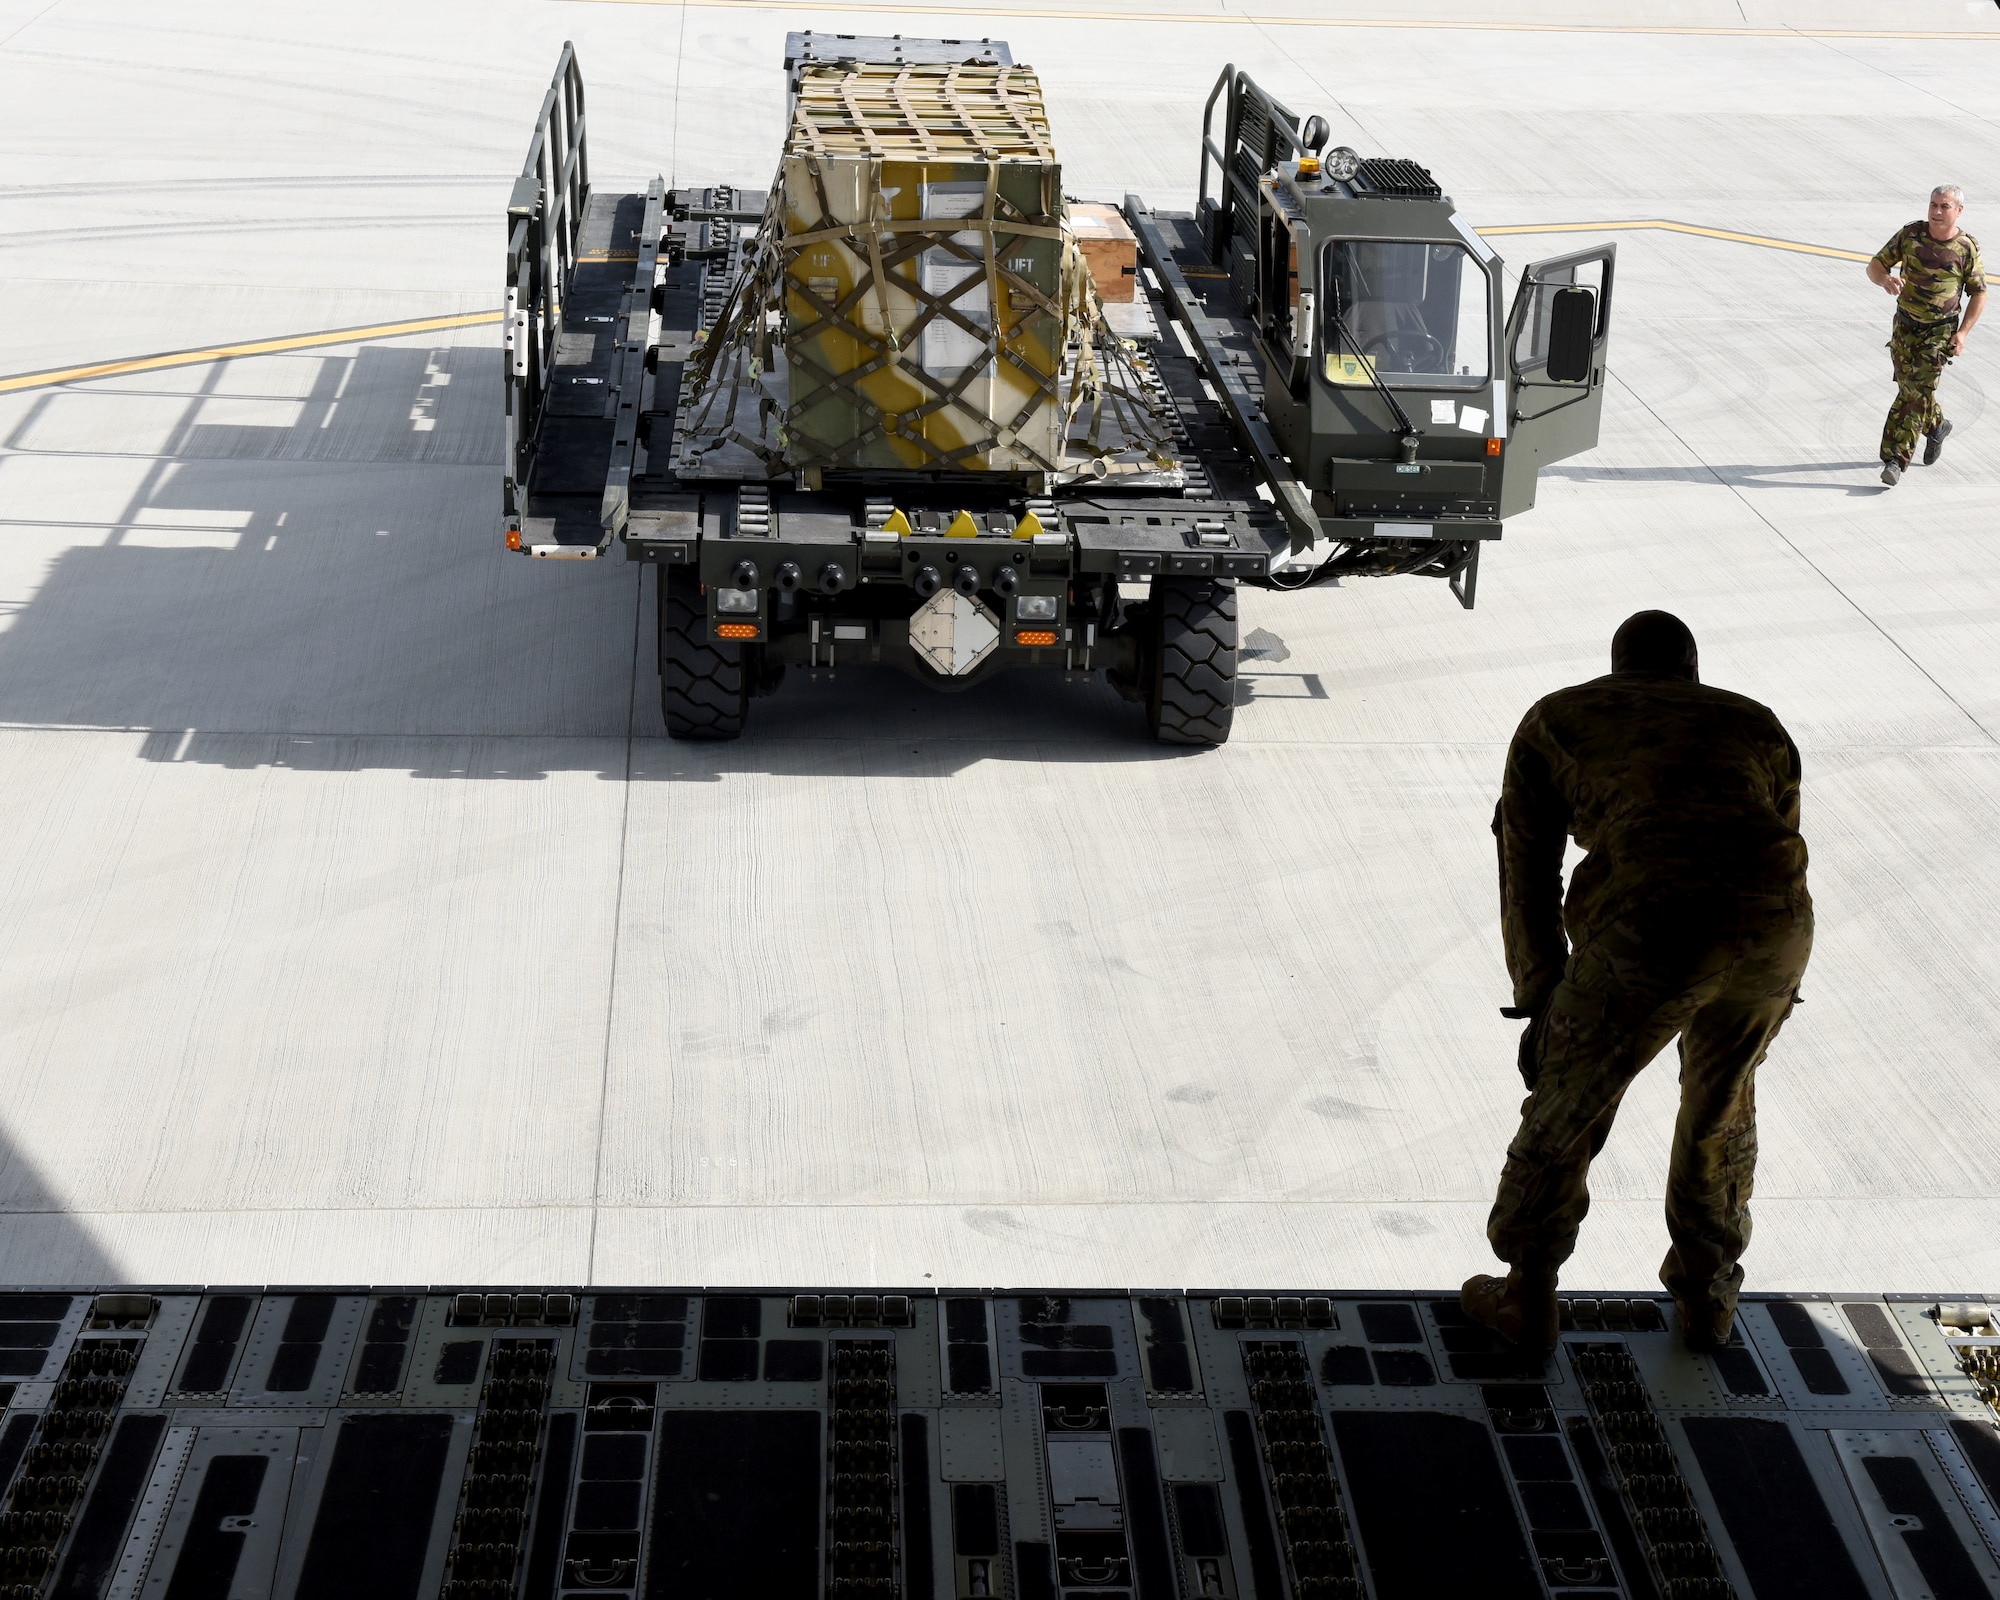 U.S. Air Force Staff Sgt. James Armstrong, 21st Airlift Squadron loadmaster, waits as a member of the Romanian armed forces runs to finish loading cargo and equipment onto a C-17 Globemaster III, May 25, 2019, in Bucharest, Romania. With more than 730 personnel deployed to Afghanistan, Romania is the sixth largest contributor of troops to NATO’s Resolute Support Mission. (U.S. Air Force photo by 2nd Lt. R. Michael Longoria)